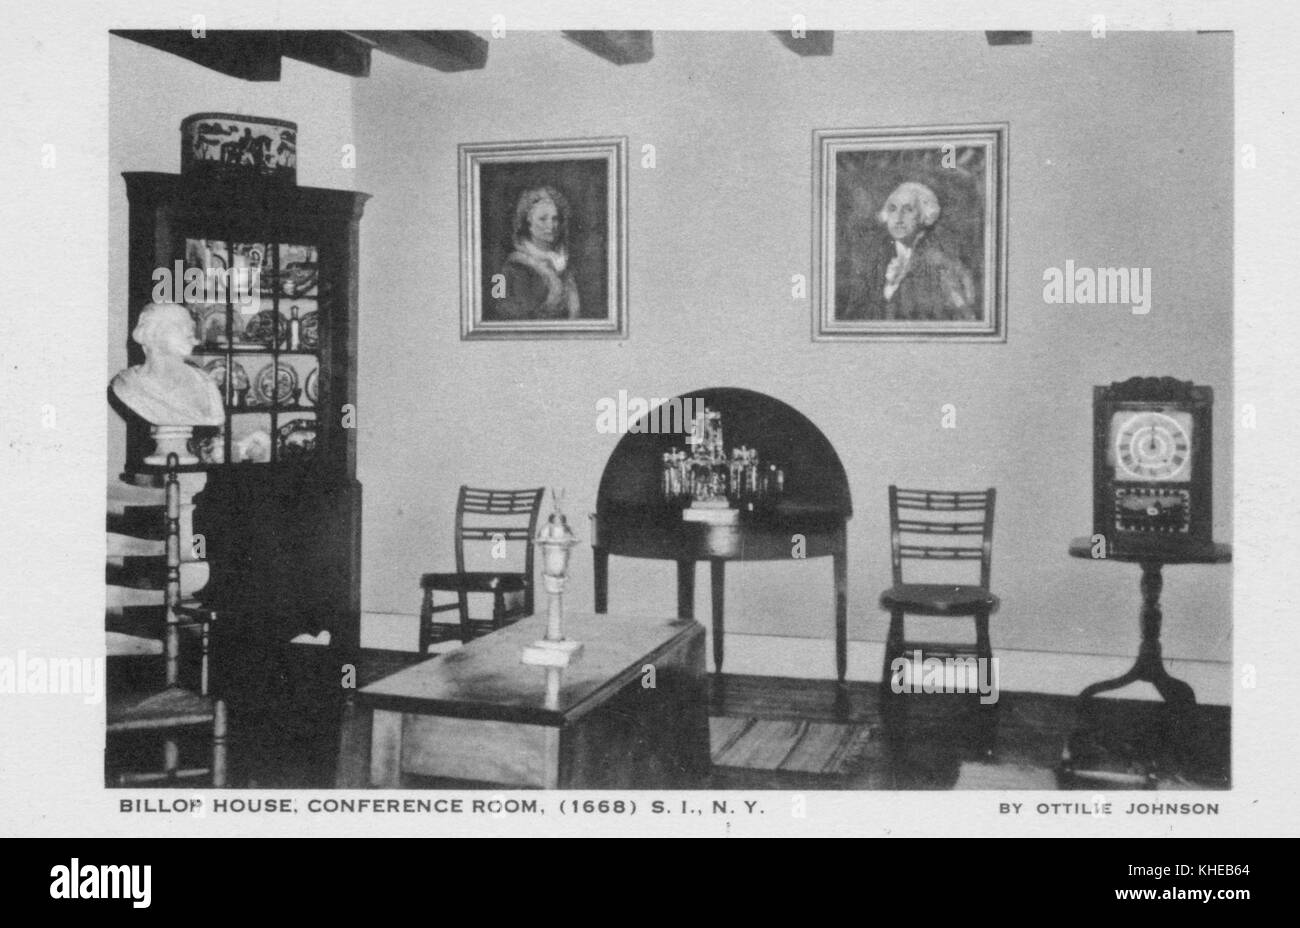 An old postcard picture of the Conference Room in Billop House, showing a wall hanged with two framed portraits of a man, two chairs set by the wall one right below each portrait, a half-moon side table set between the chairs, a man's bust mounted on the left side of the room, a wooden cabinet full of china standing on the left wall, and a rectangular low table set on the center of the room, Staten Island, New York, 1900. From the New York Public Library. Stock Photo